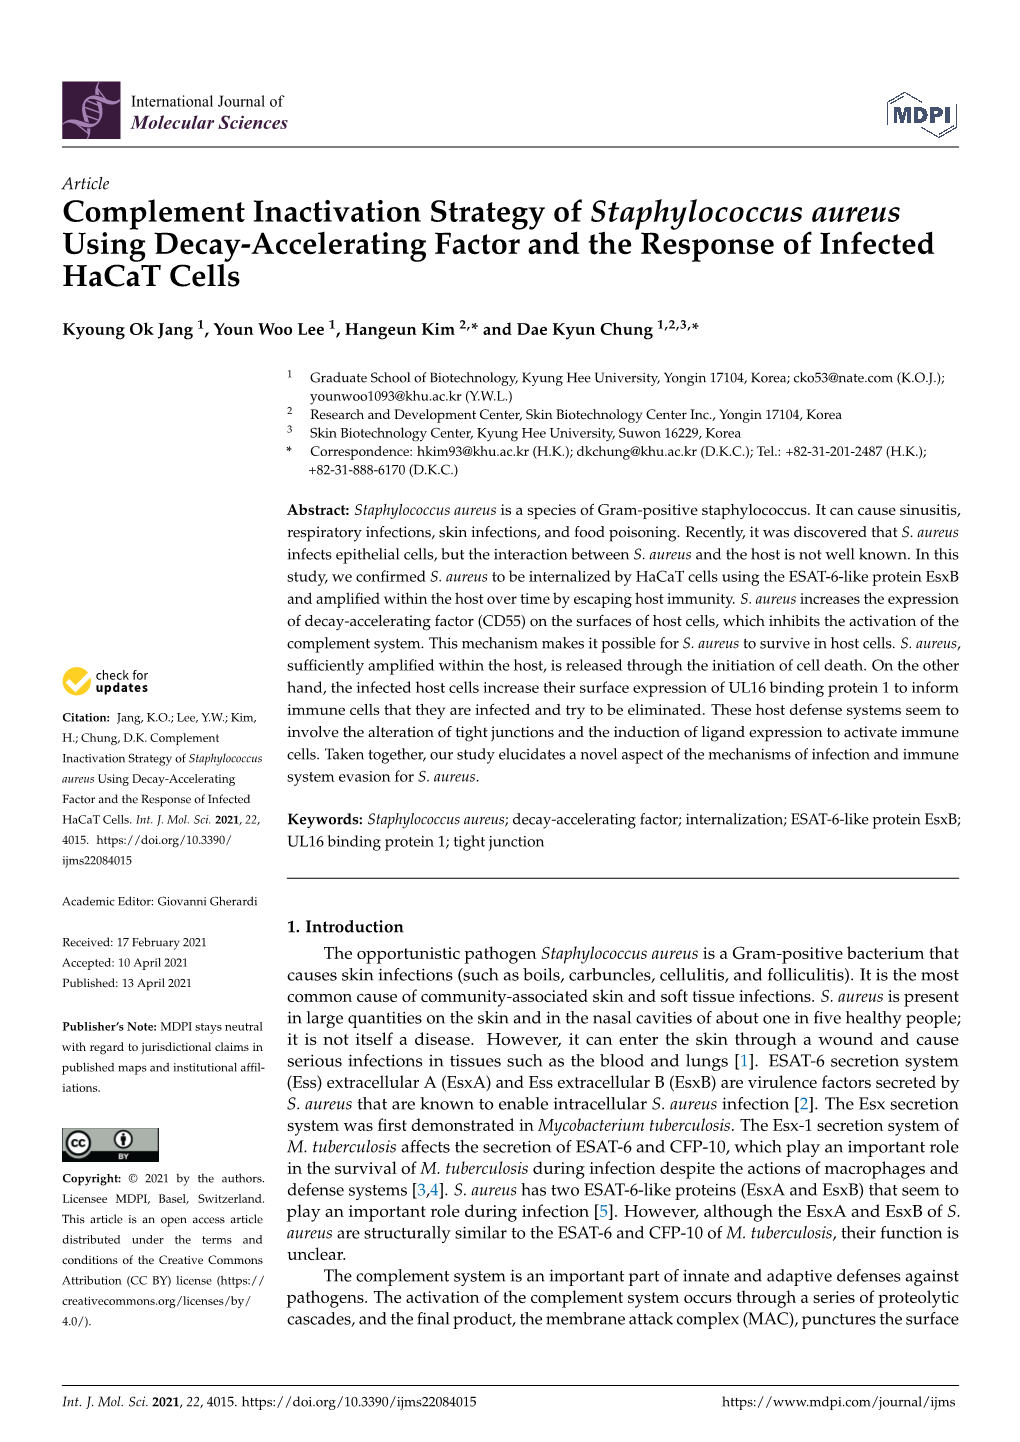 Complement Inactivation Strategy of Staphylococcus Aureus Using Decay-Accelerating Factor and the Response of Infected Hacat Cells